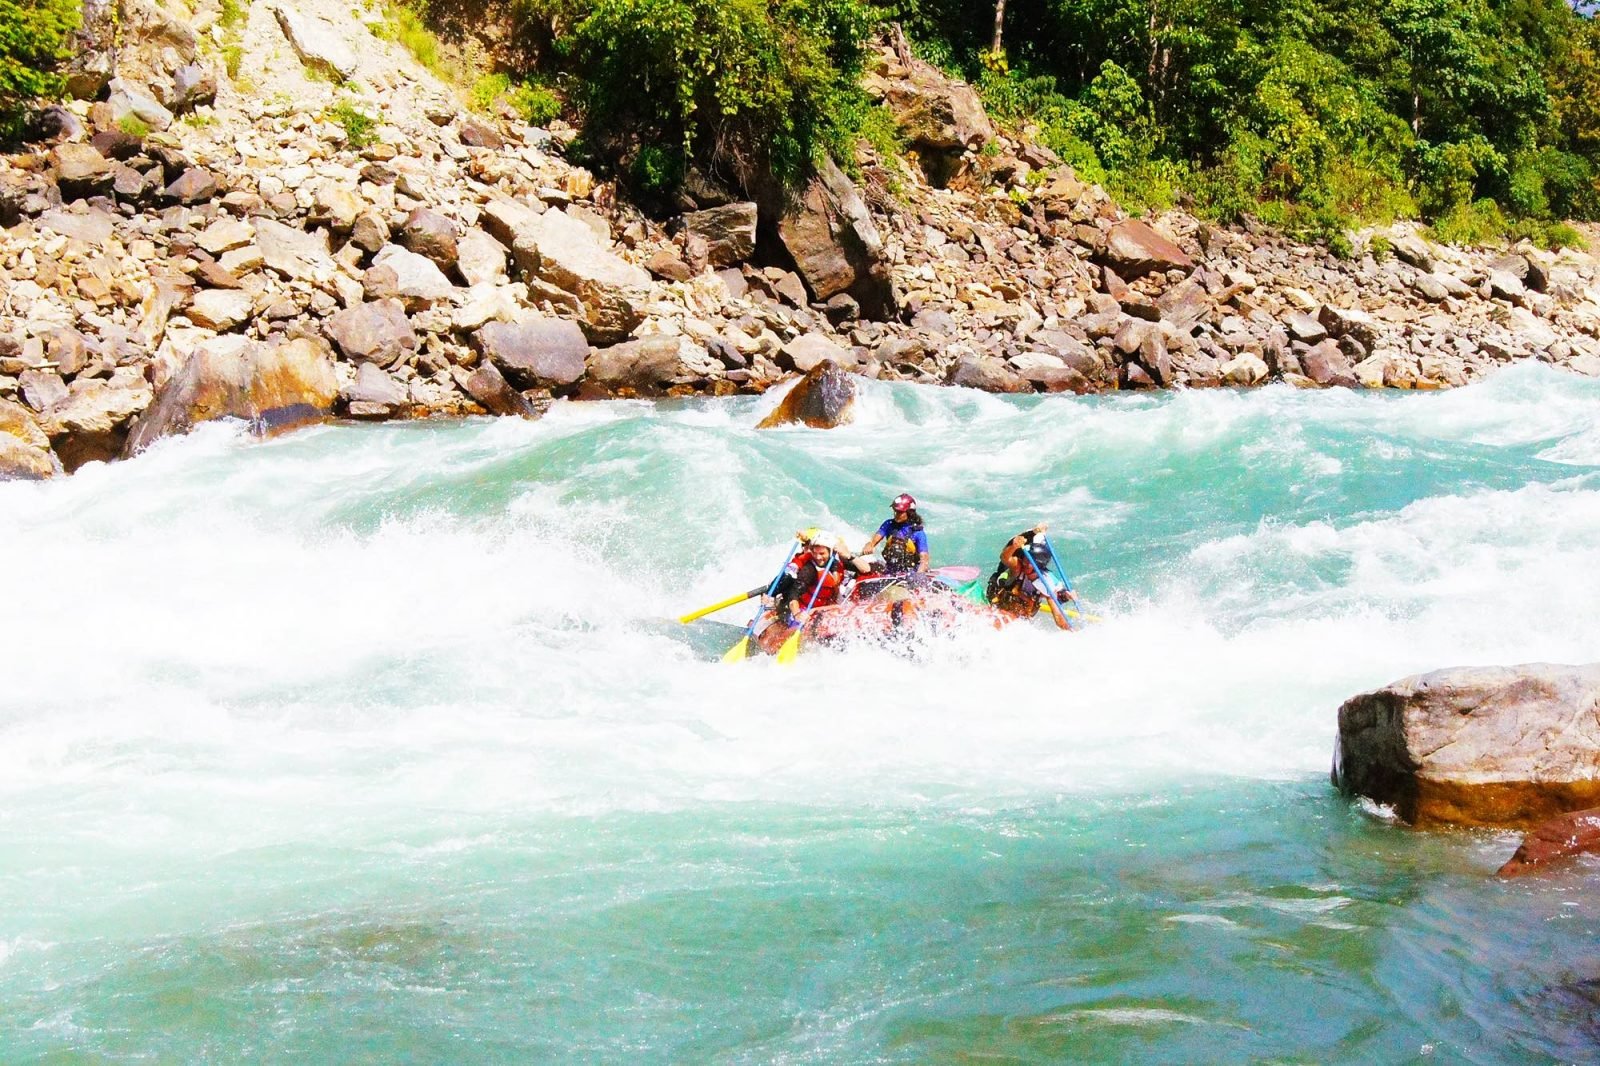 Rafting on the Sun Kosi River in Nepal, one of the most remarkable rivers in the world.